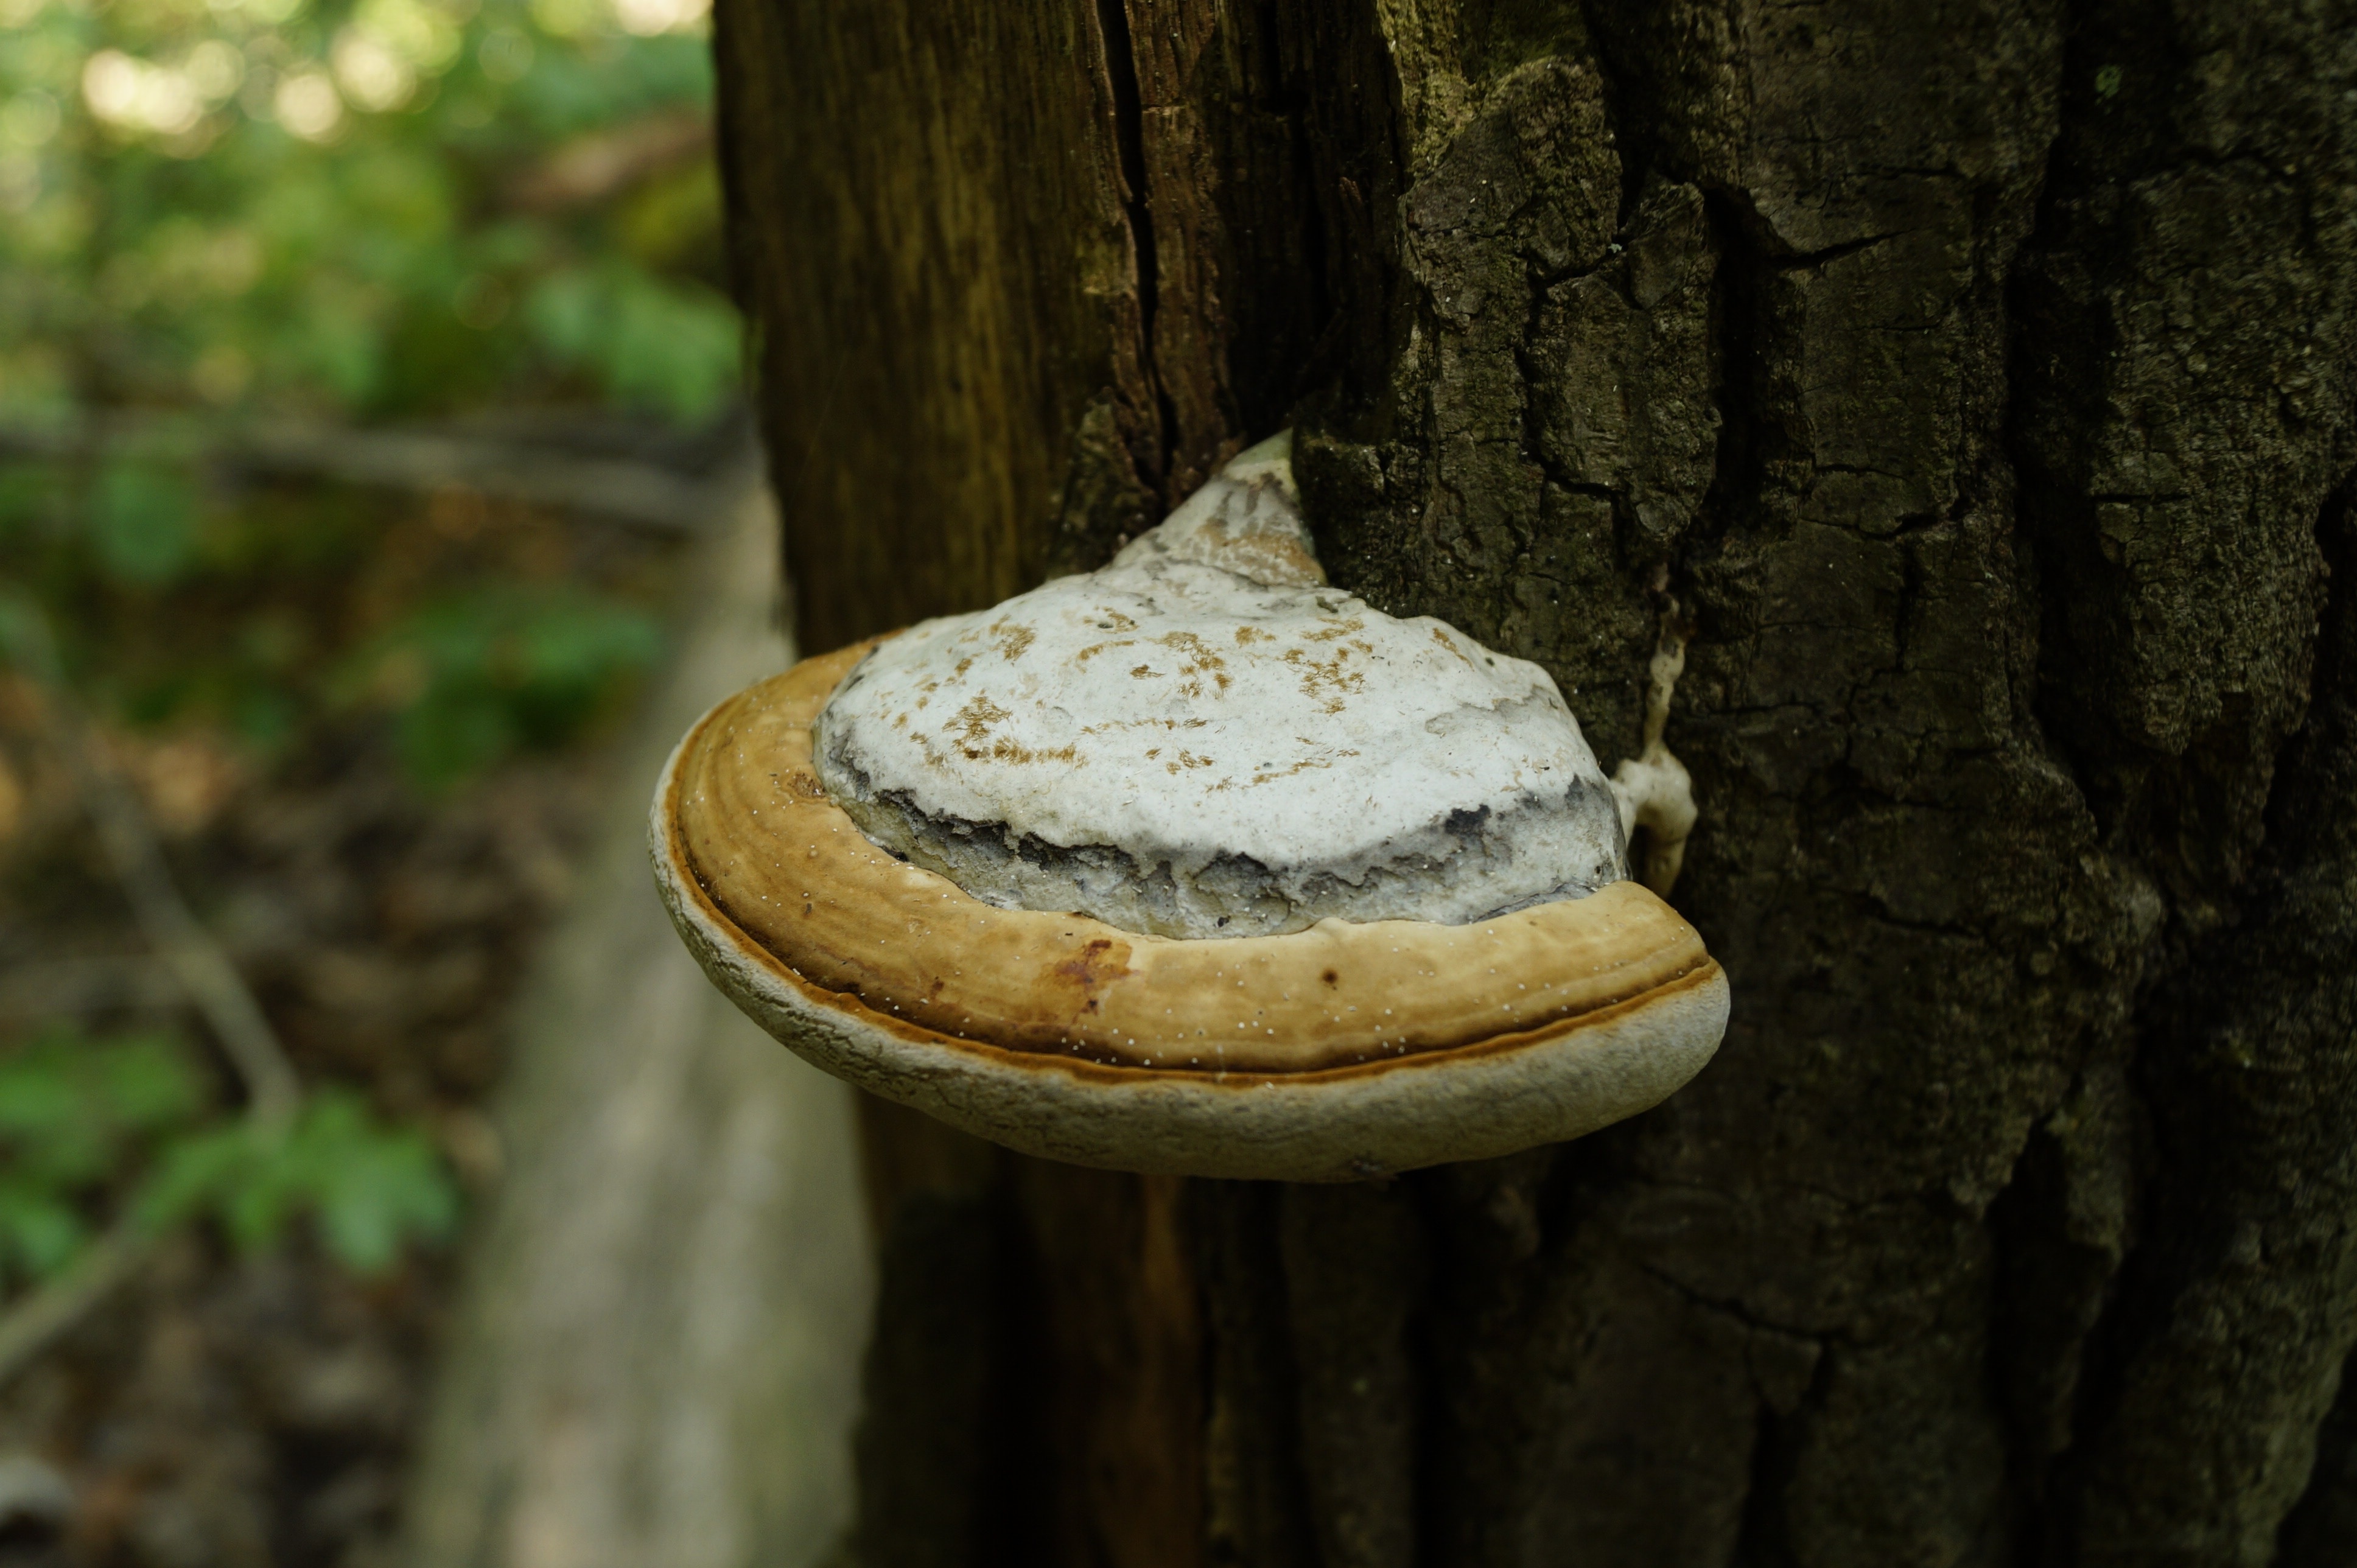 white and brown fungus on black bark tree trunk during daytime